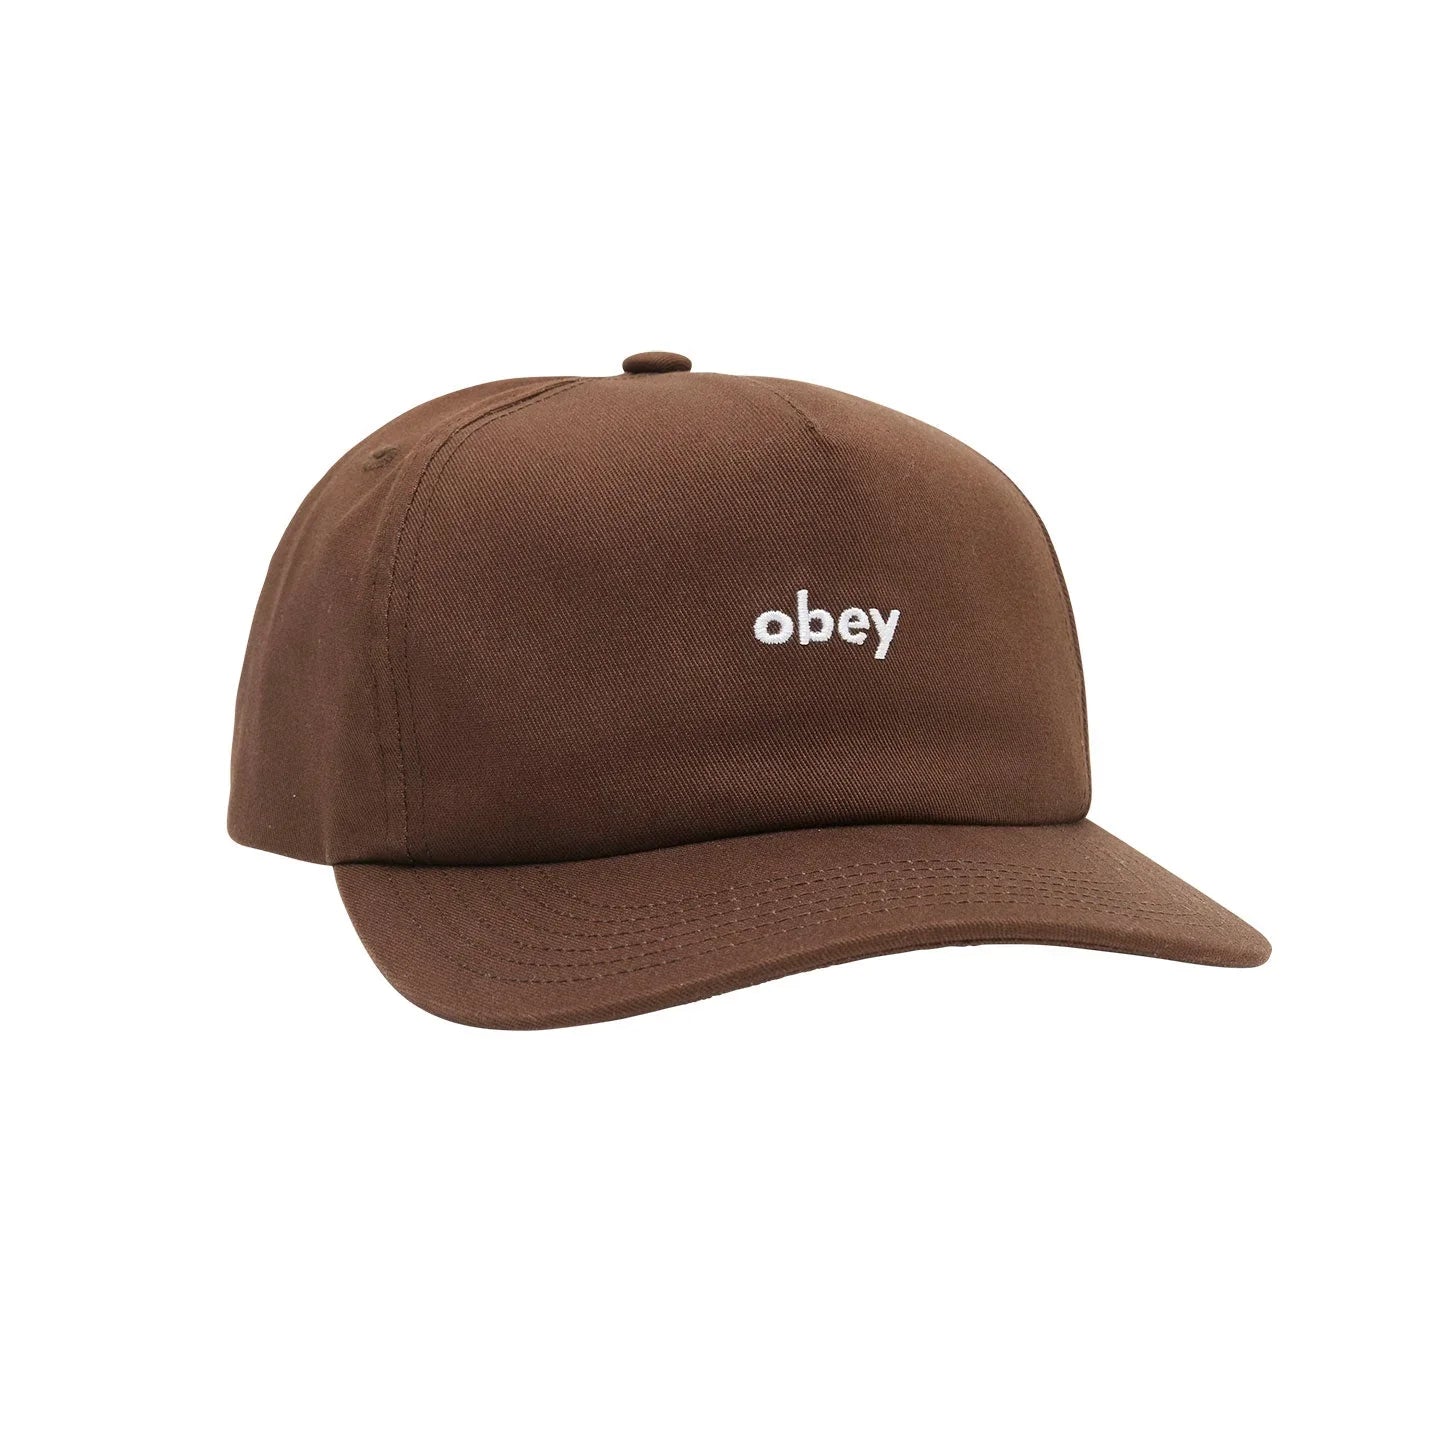 CAPPELLO OBEY LOWERCASE 5 PANEL SNAP